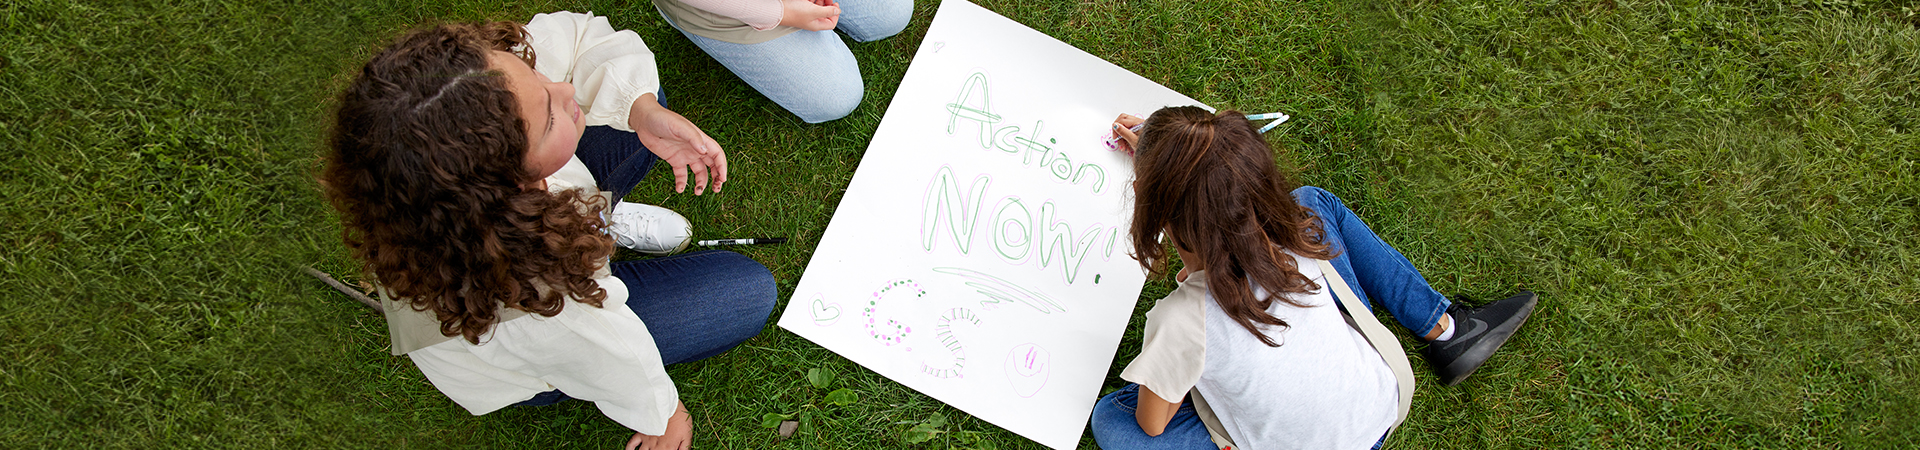  Three girls making a poster that reads "Action Now" 